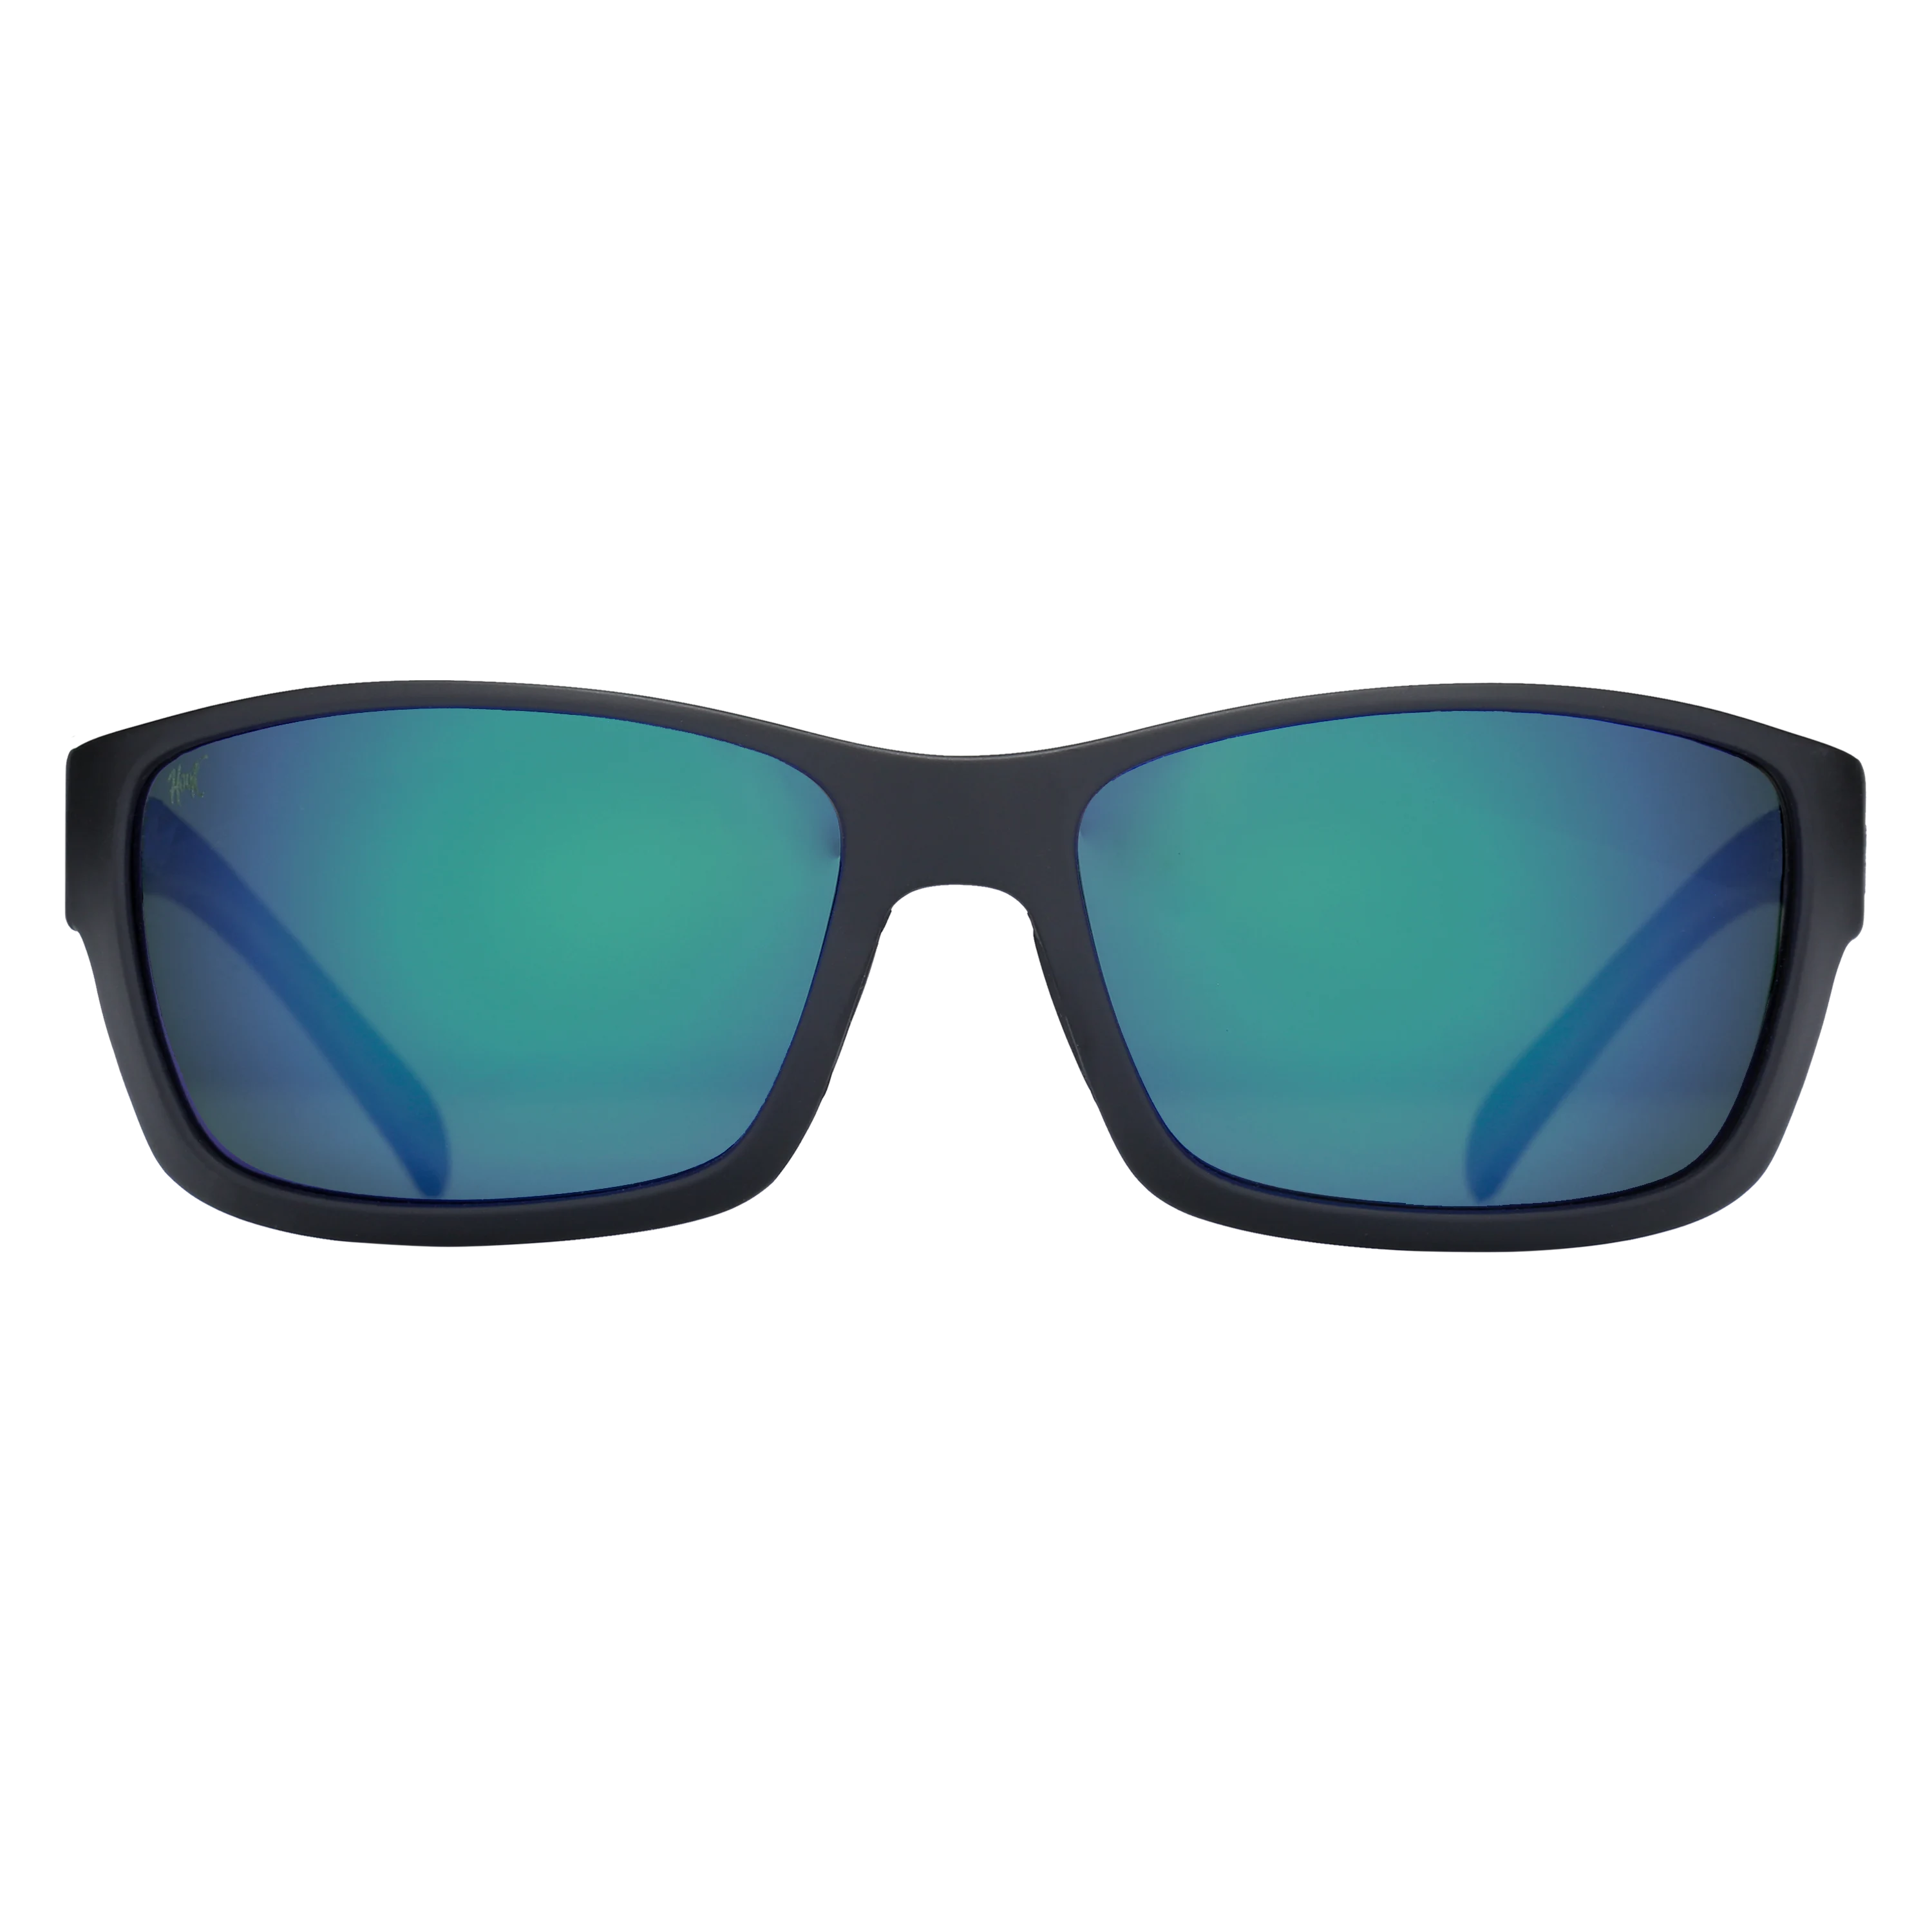 Polarized Sunglasses with Magnification: The Ultimate Eye Protection for  Outdoors and Work| MCR Safety Info Blog